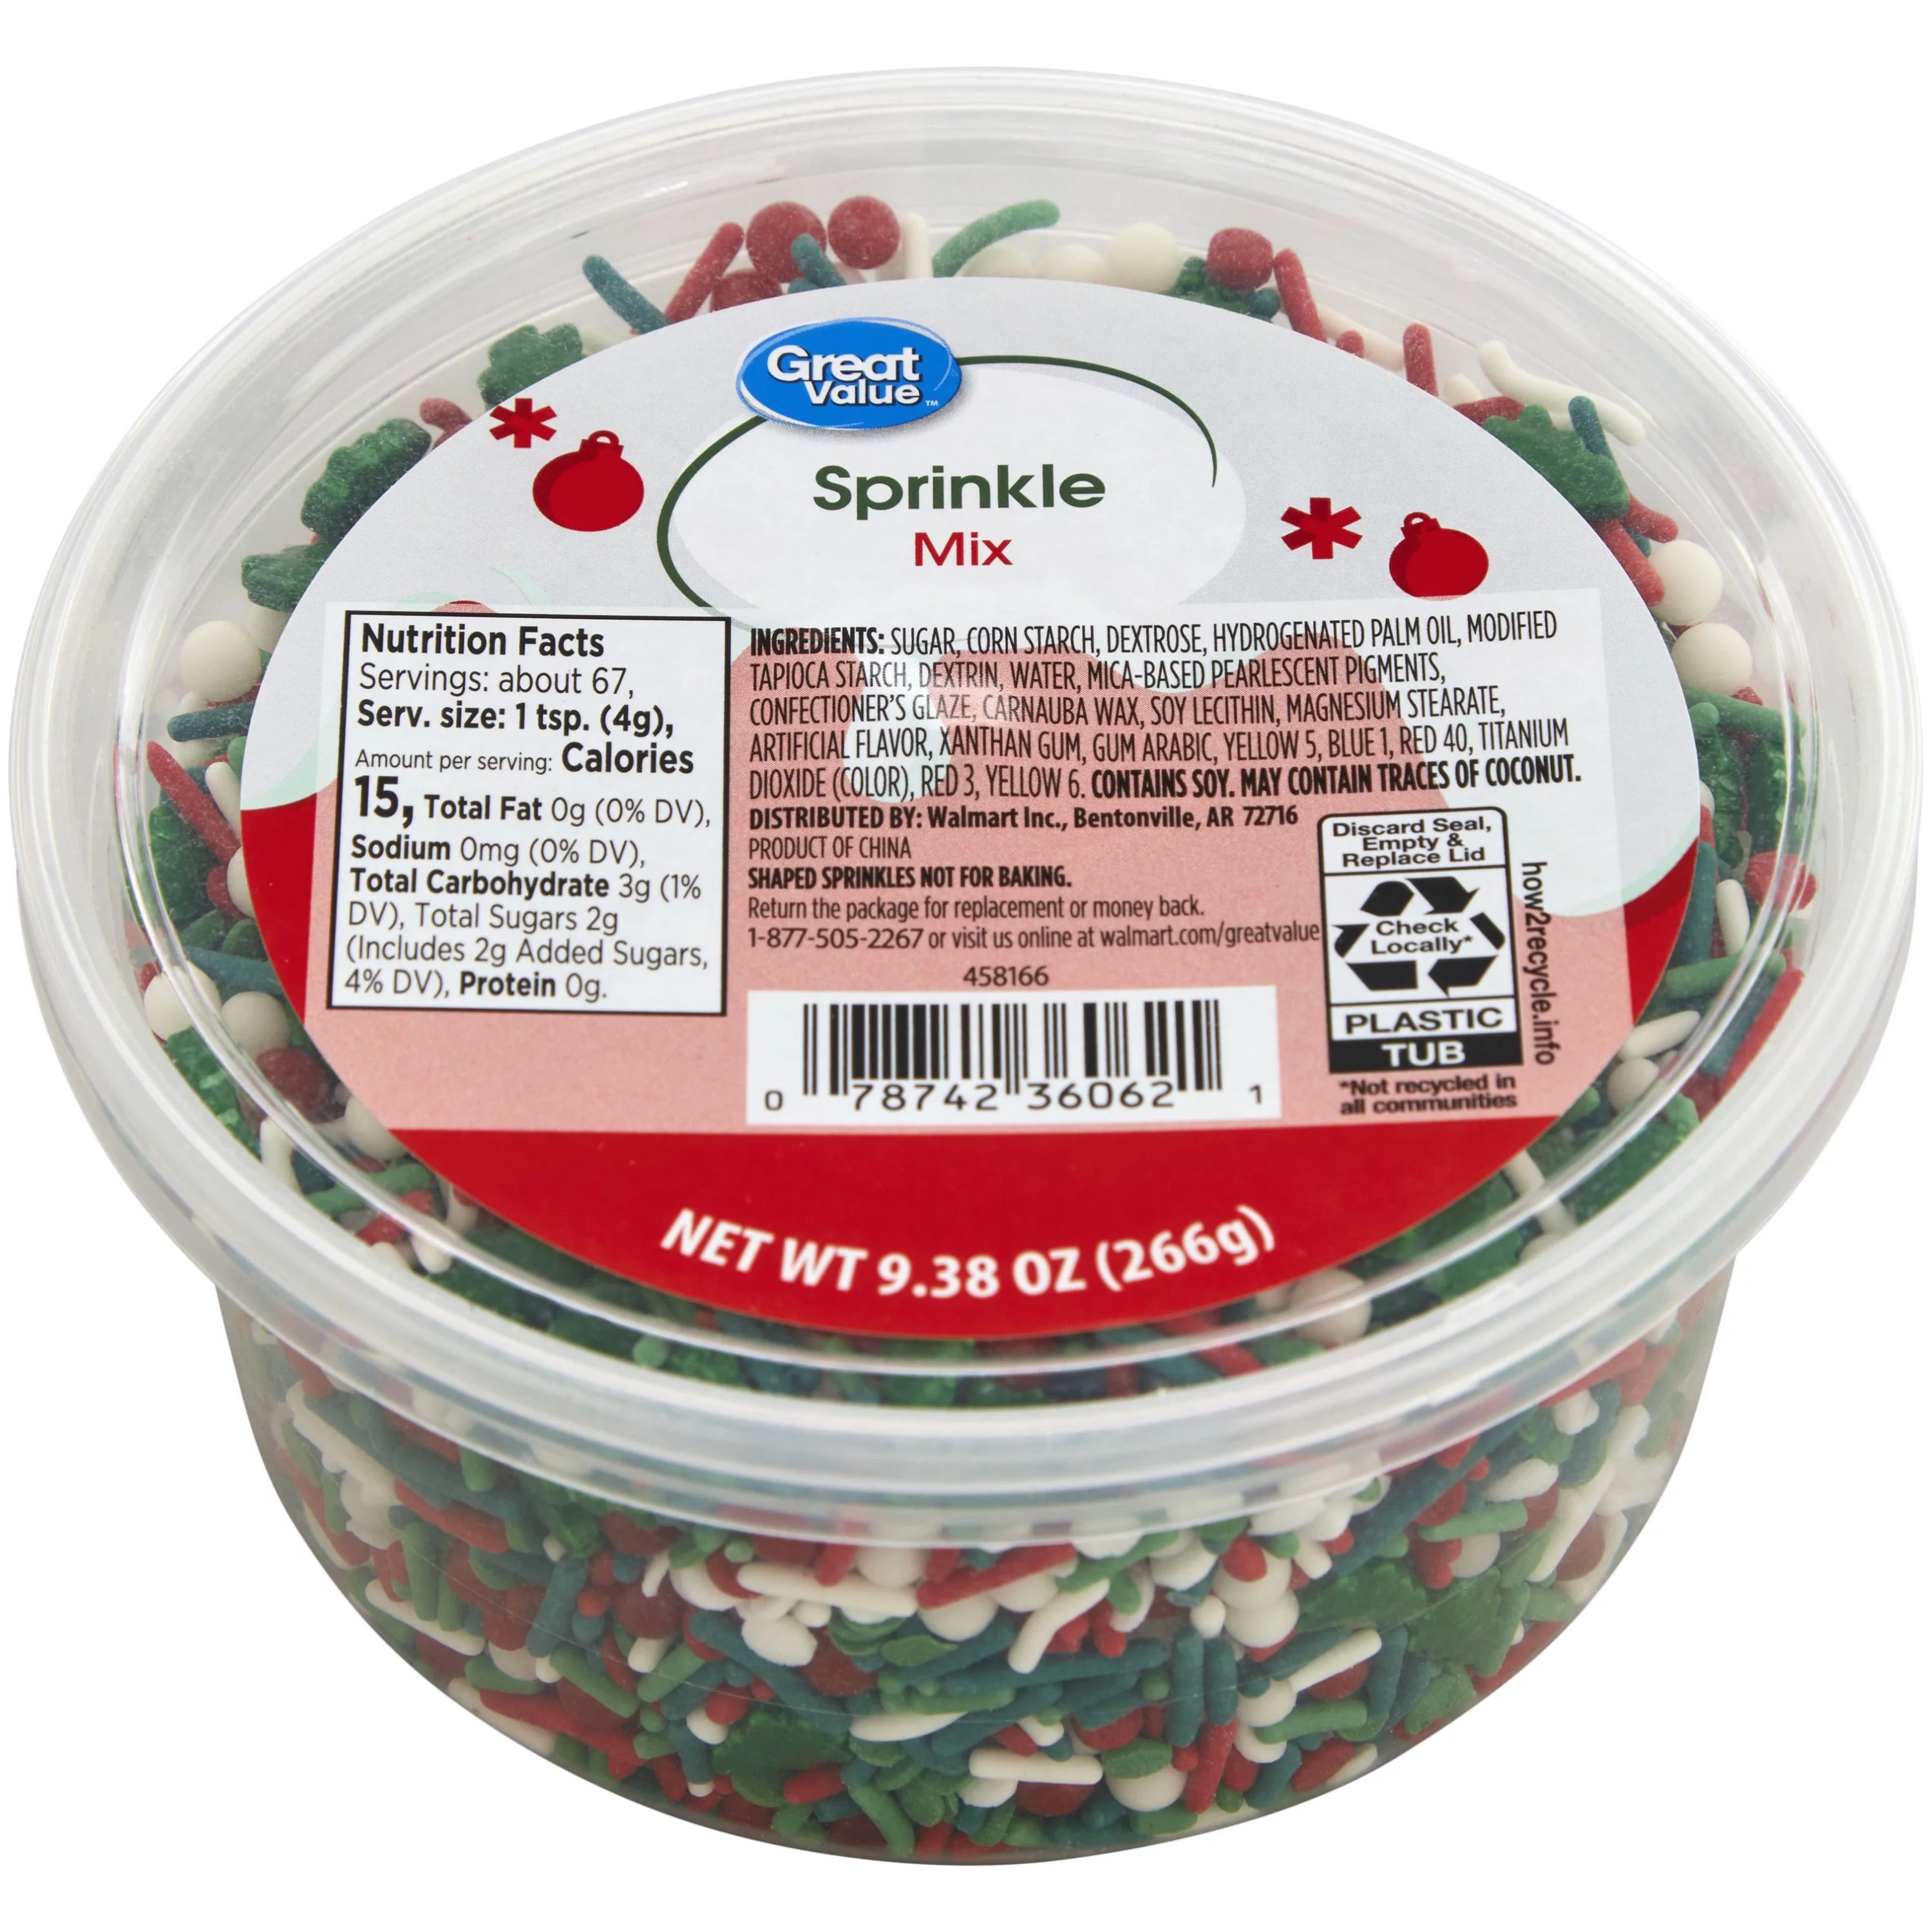 Great Value Christmas Tree Sprinkles Mix, Red, Green and White Decorations for Desserts, 9.38 oz. | Walmart (US)